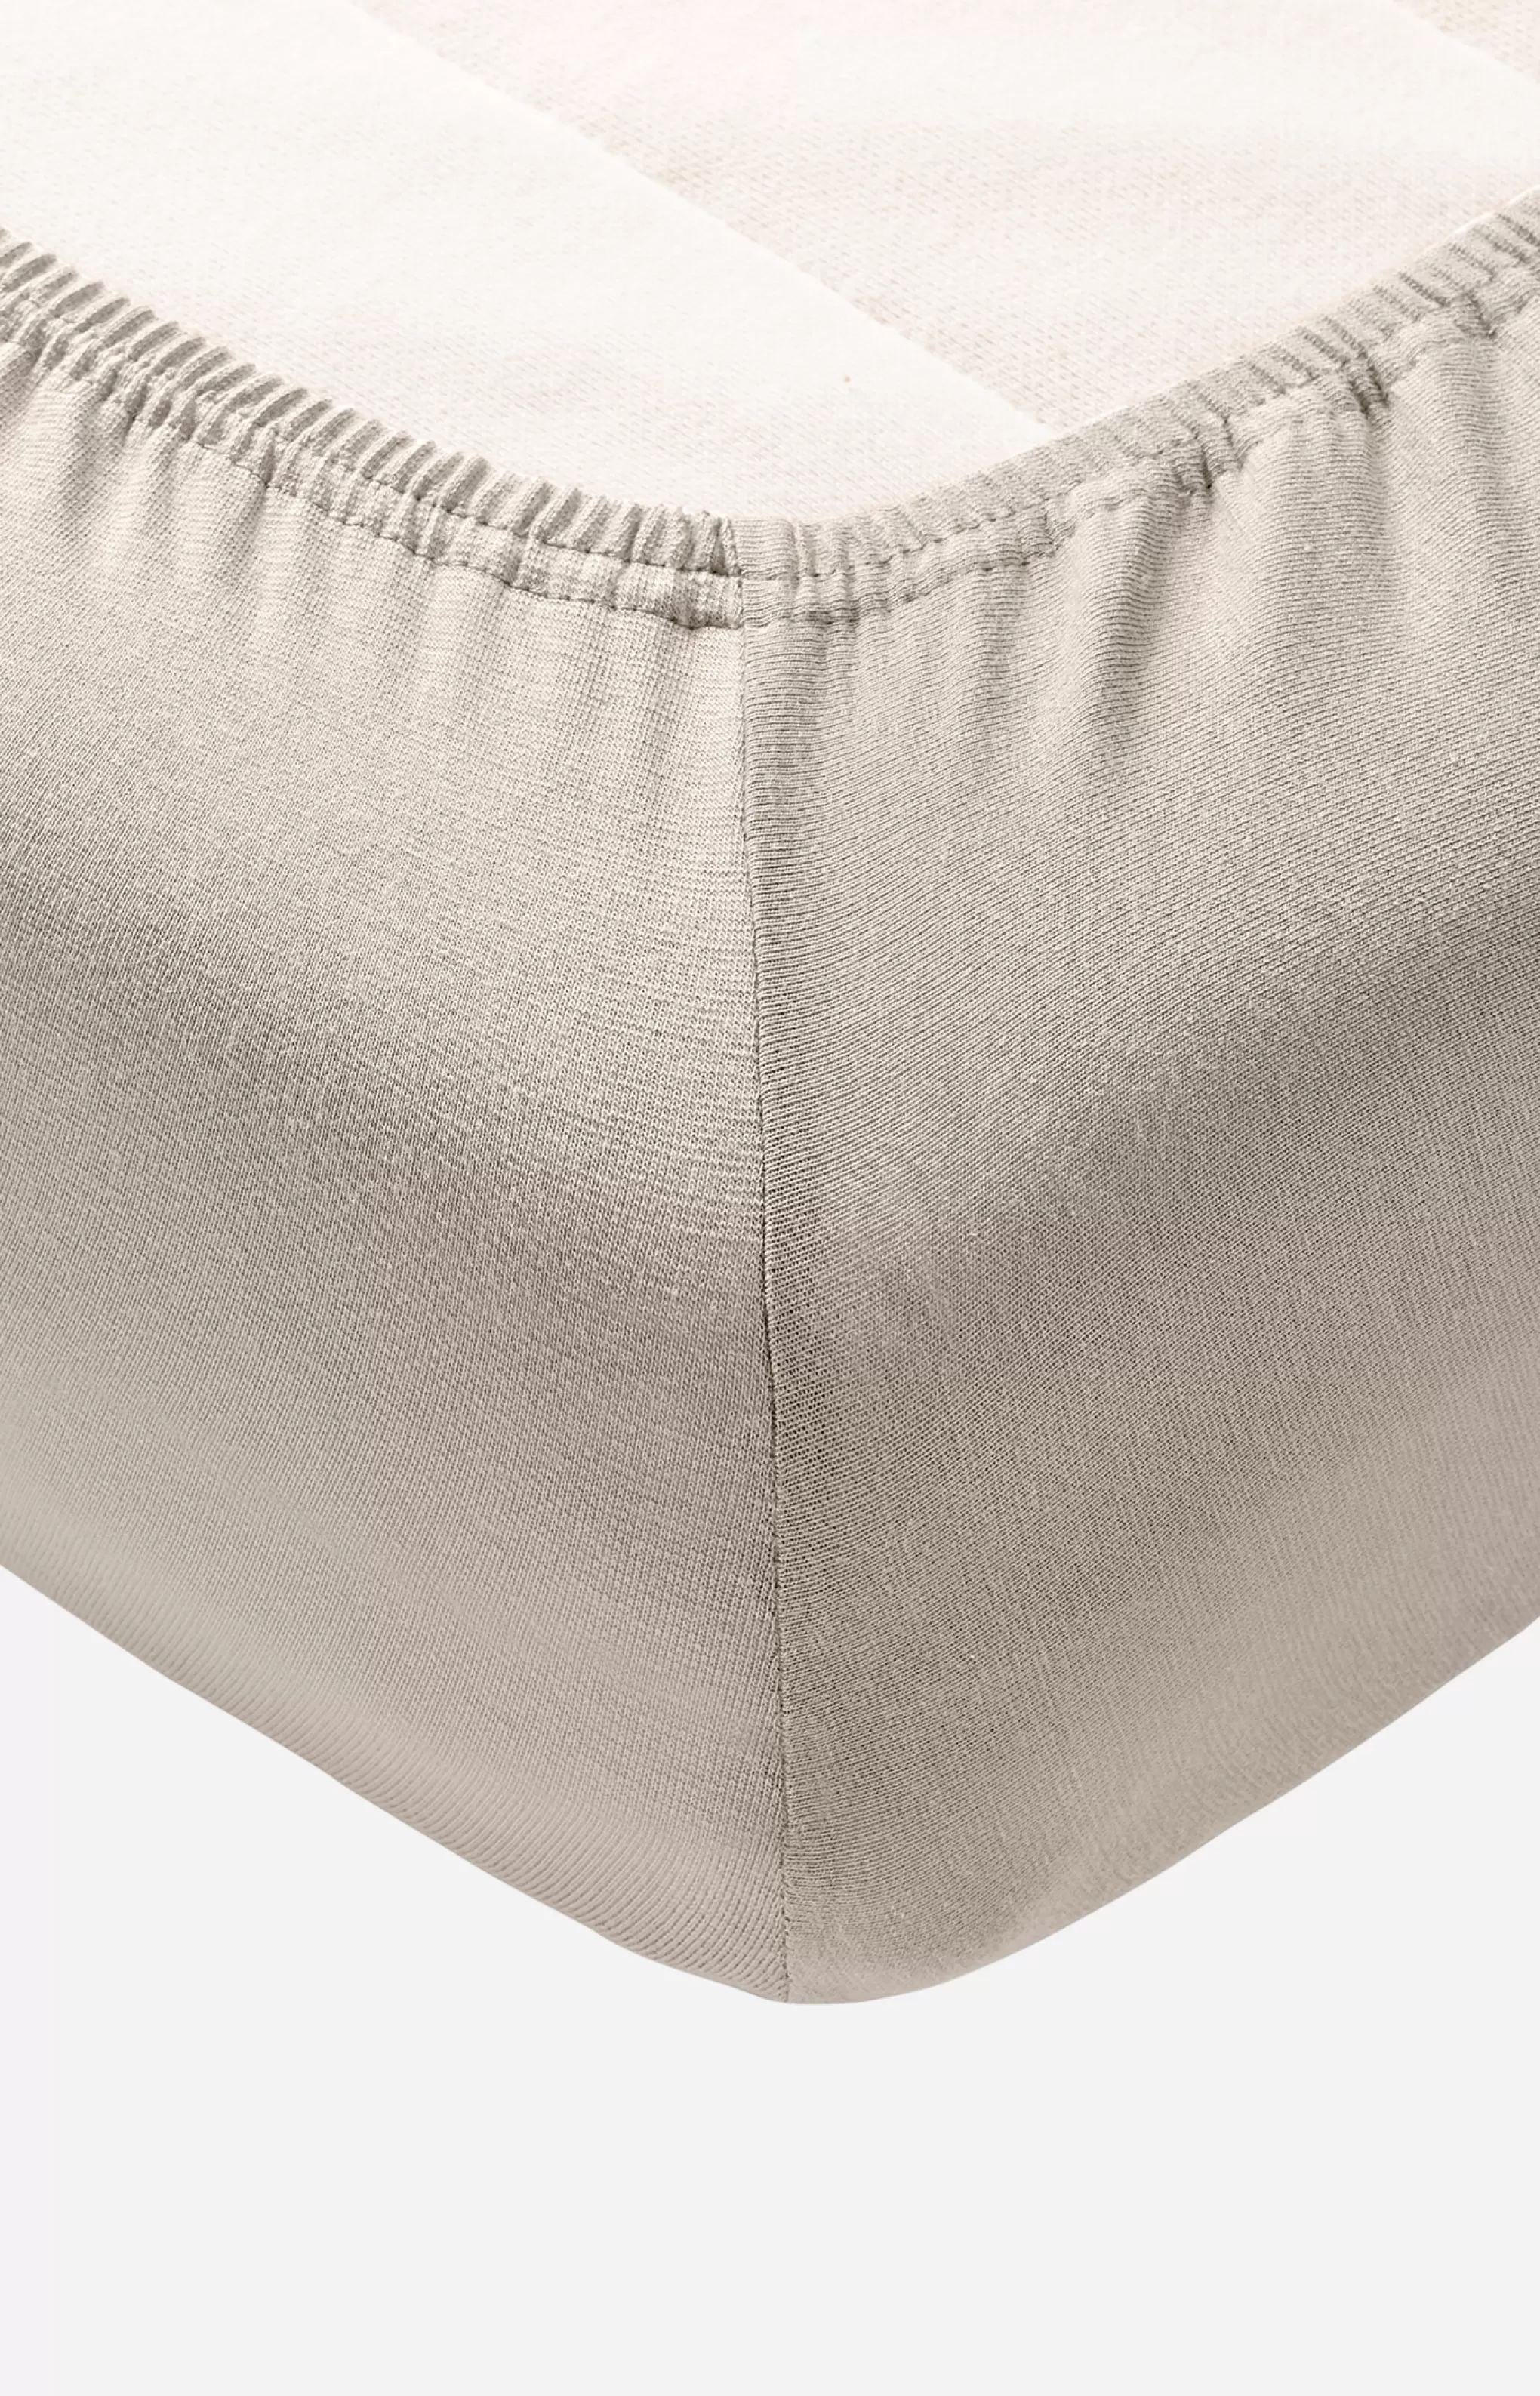 Fitted Sheets | Discover Everything*JOOP Fitted Sheets | Discover Everything Fitted Sheets in